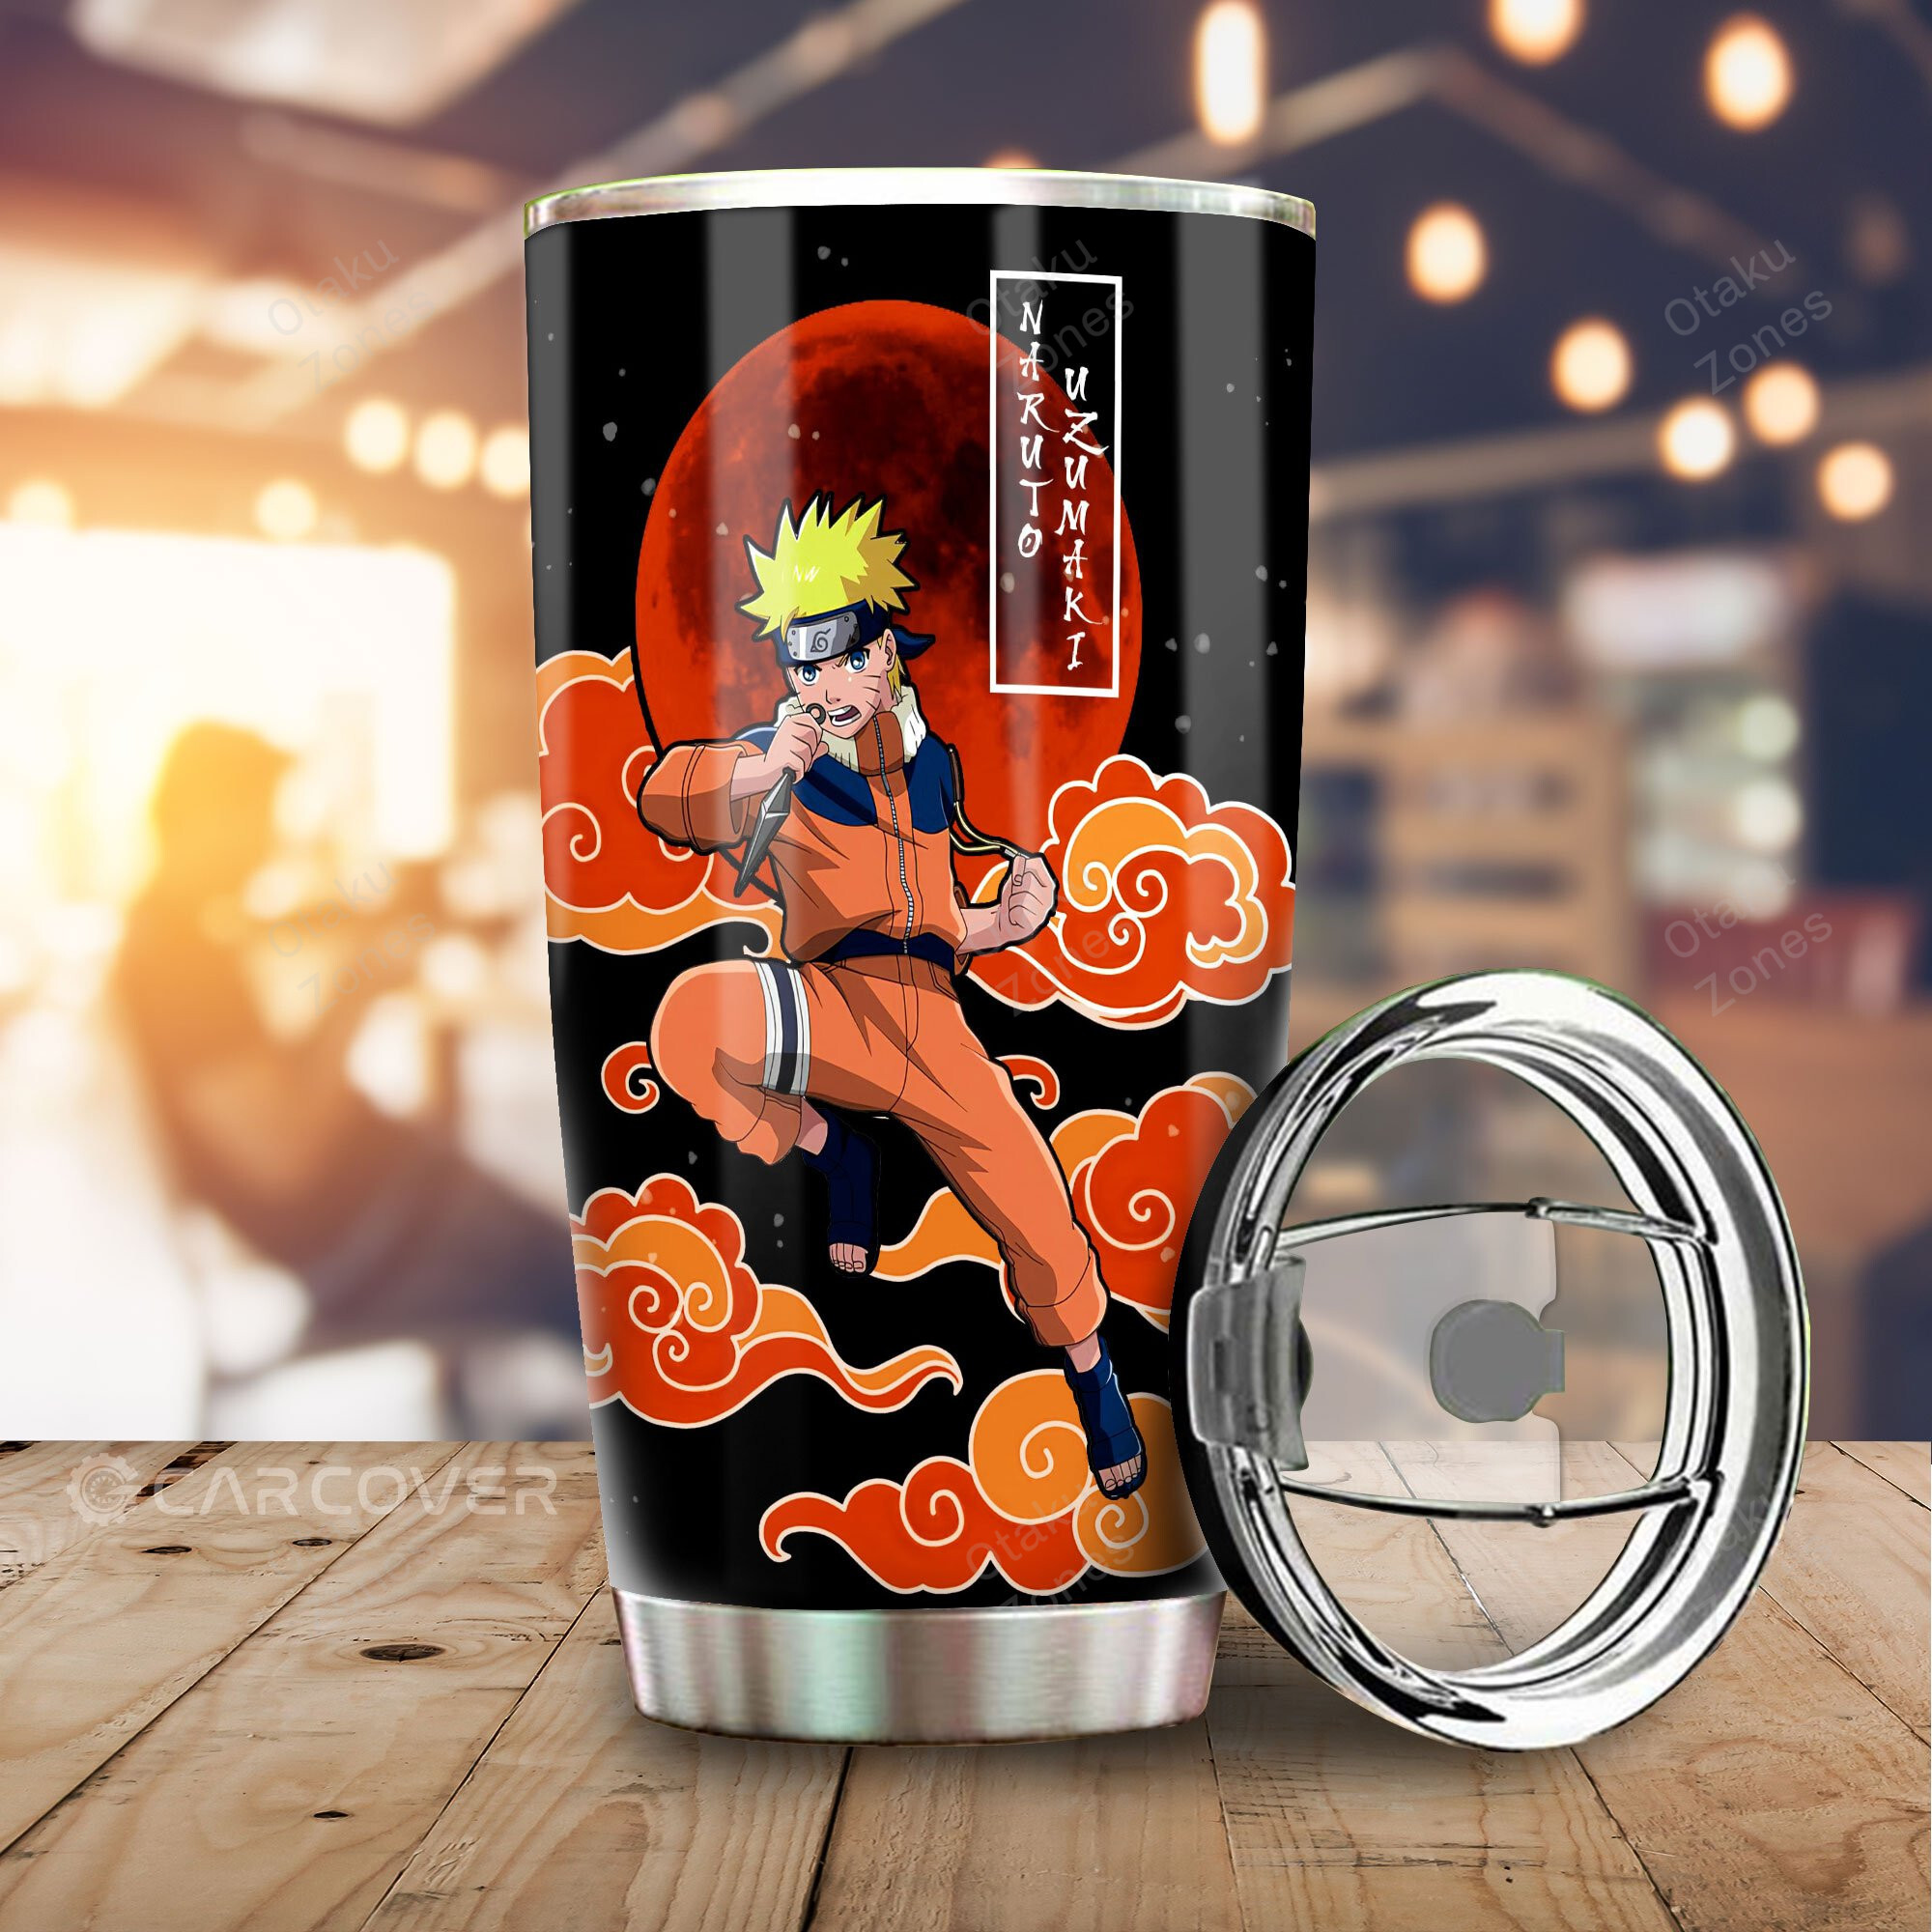 Show off your favorite Anime character in style with these products 6